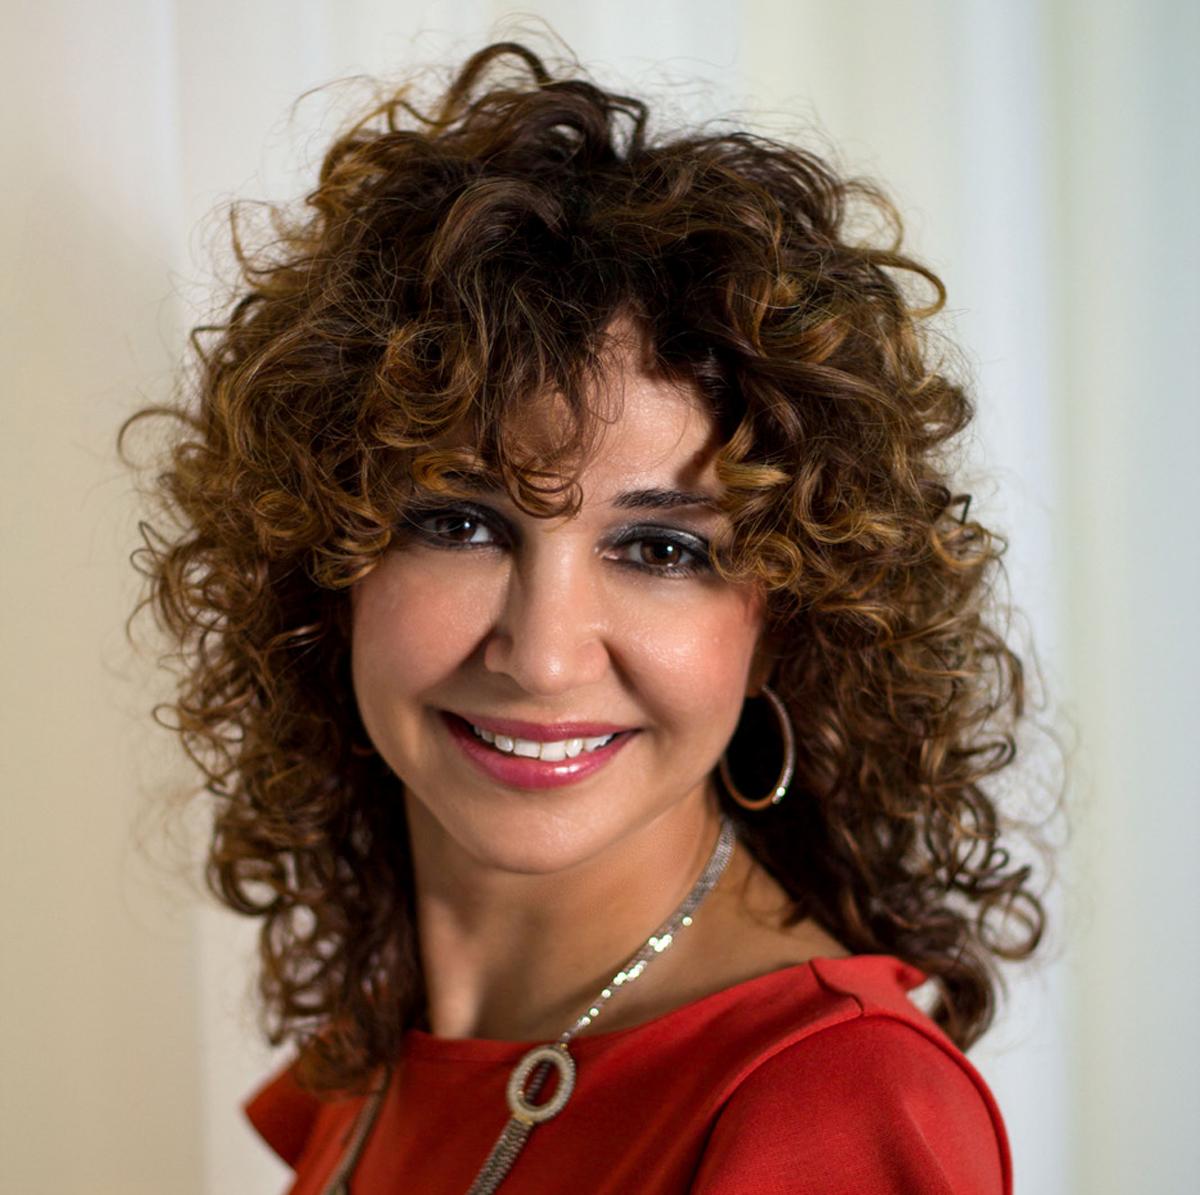 Founder Daniela Dadurian is a specialist in functional medicine, laser treatment and cosmetic medicine / 